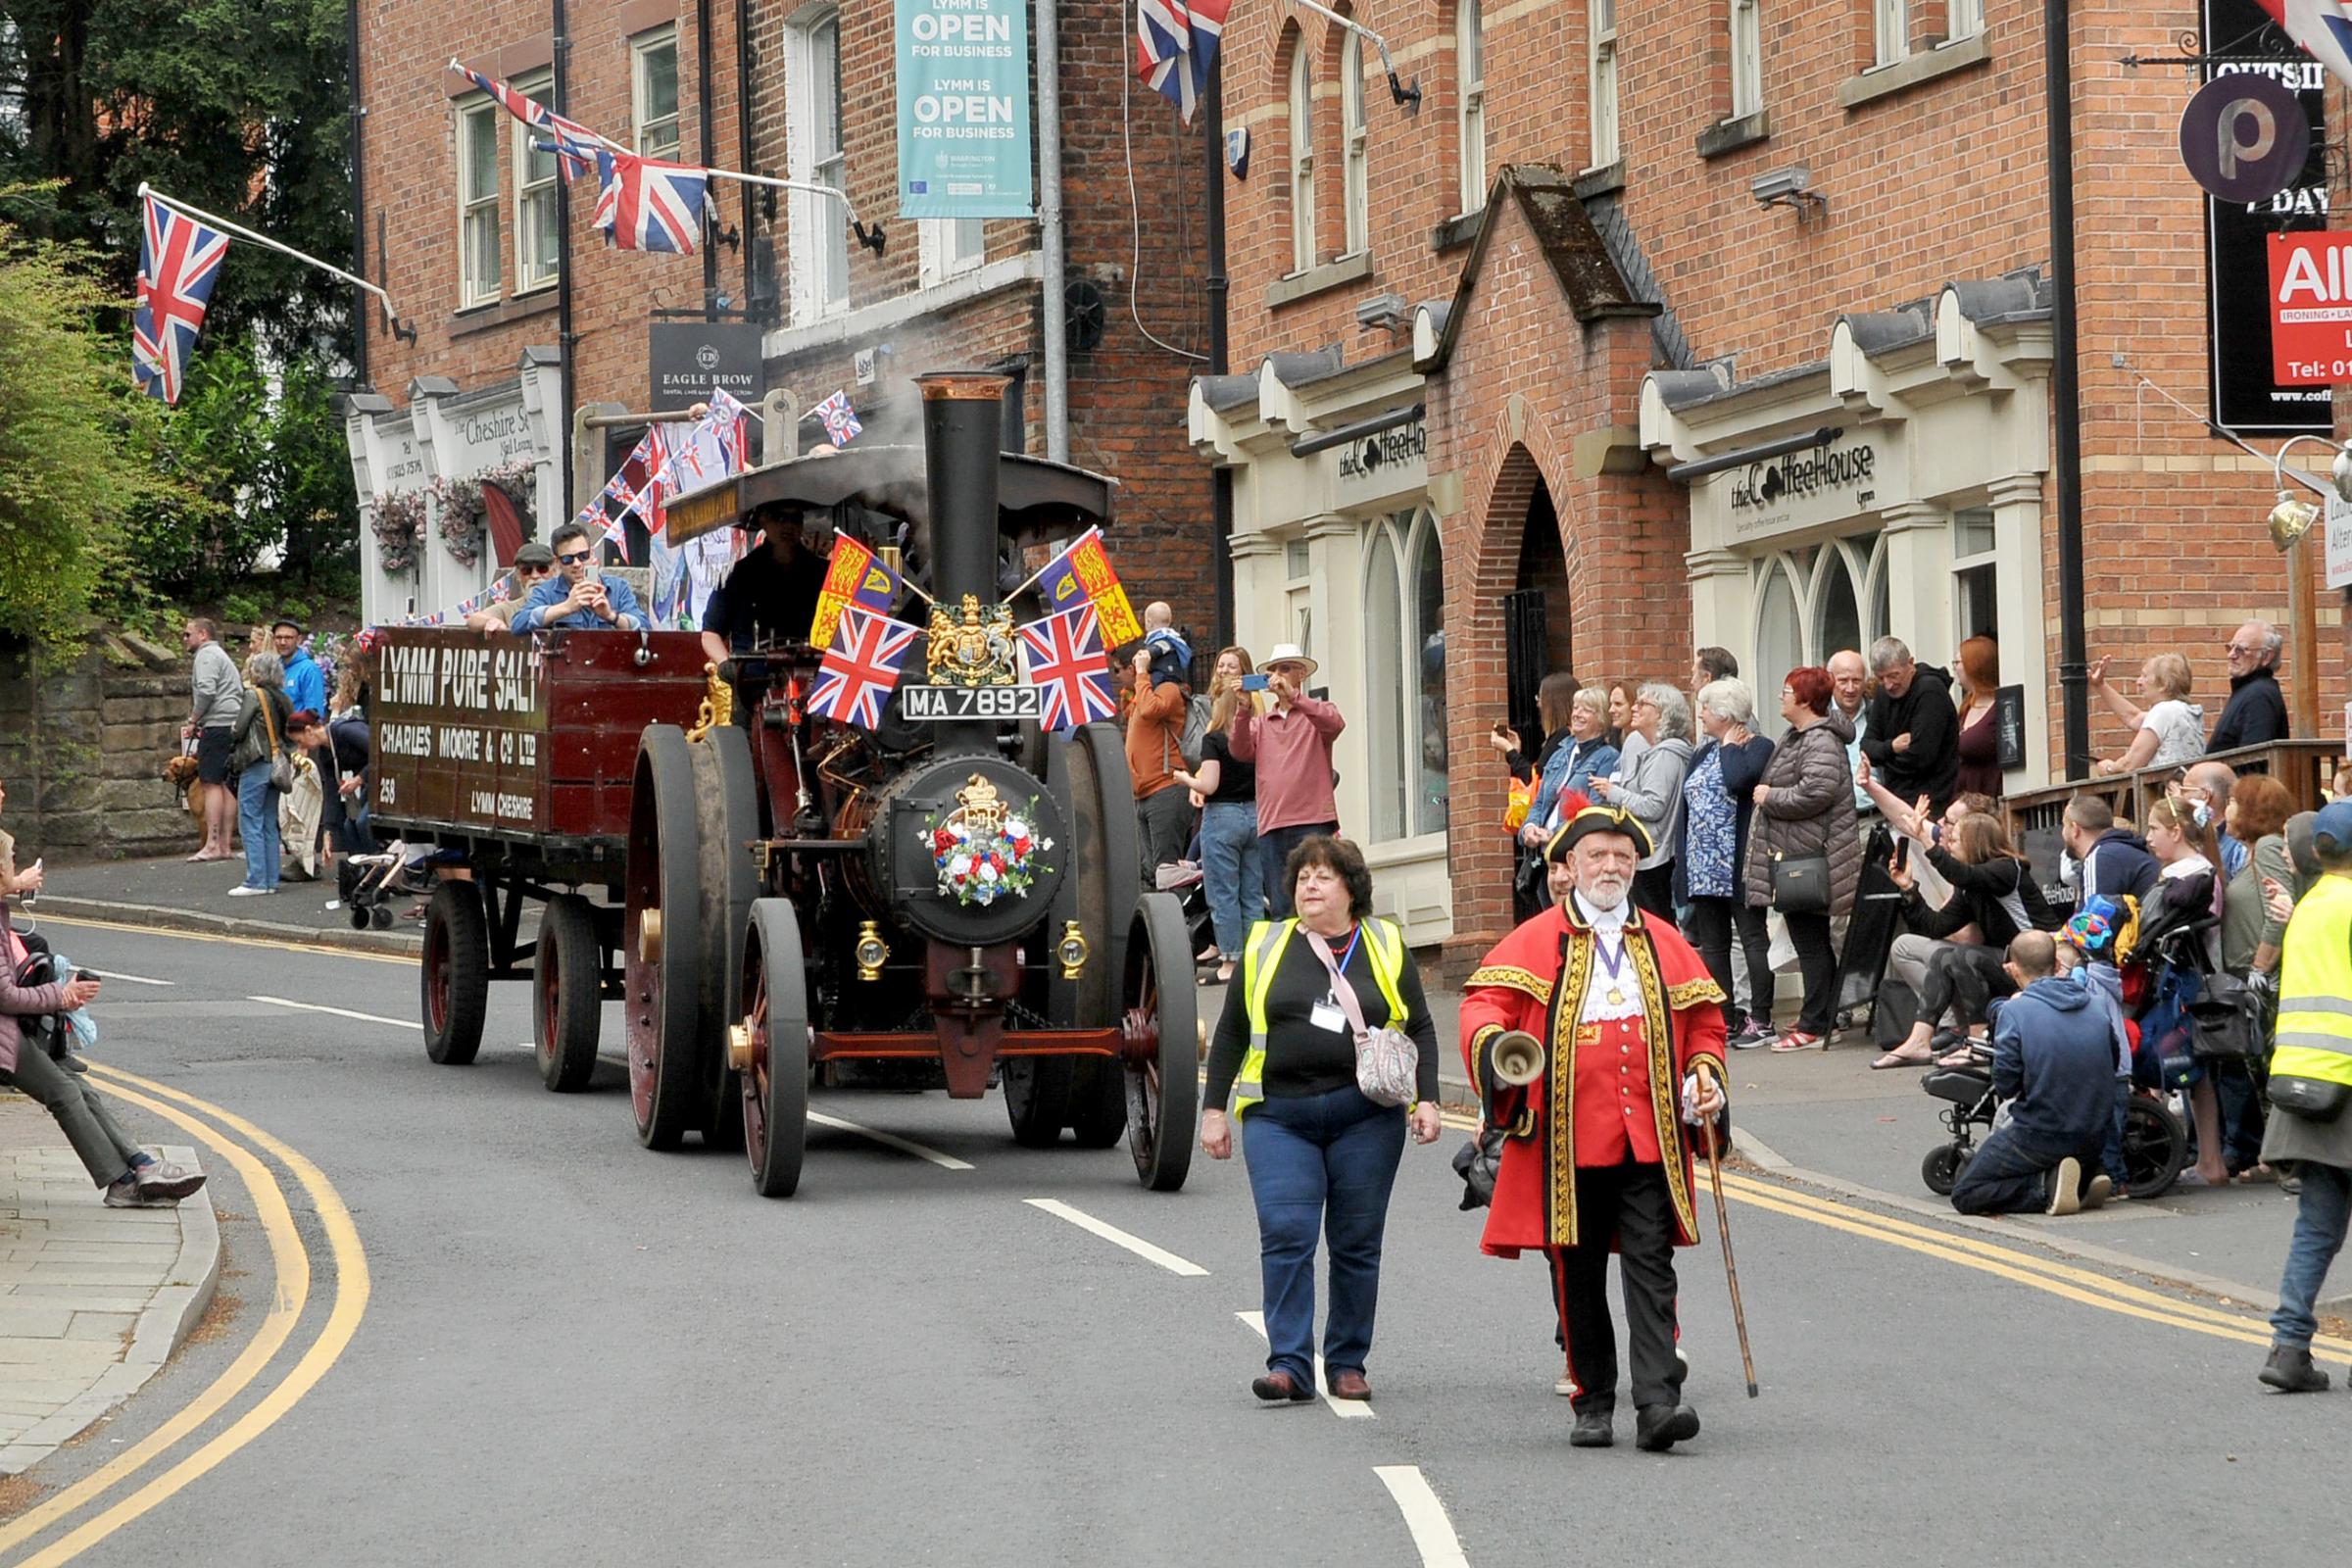 The procession heading through the village